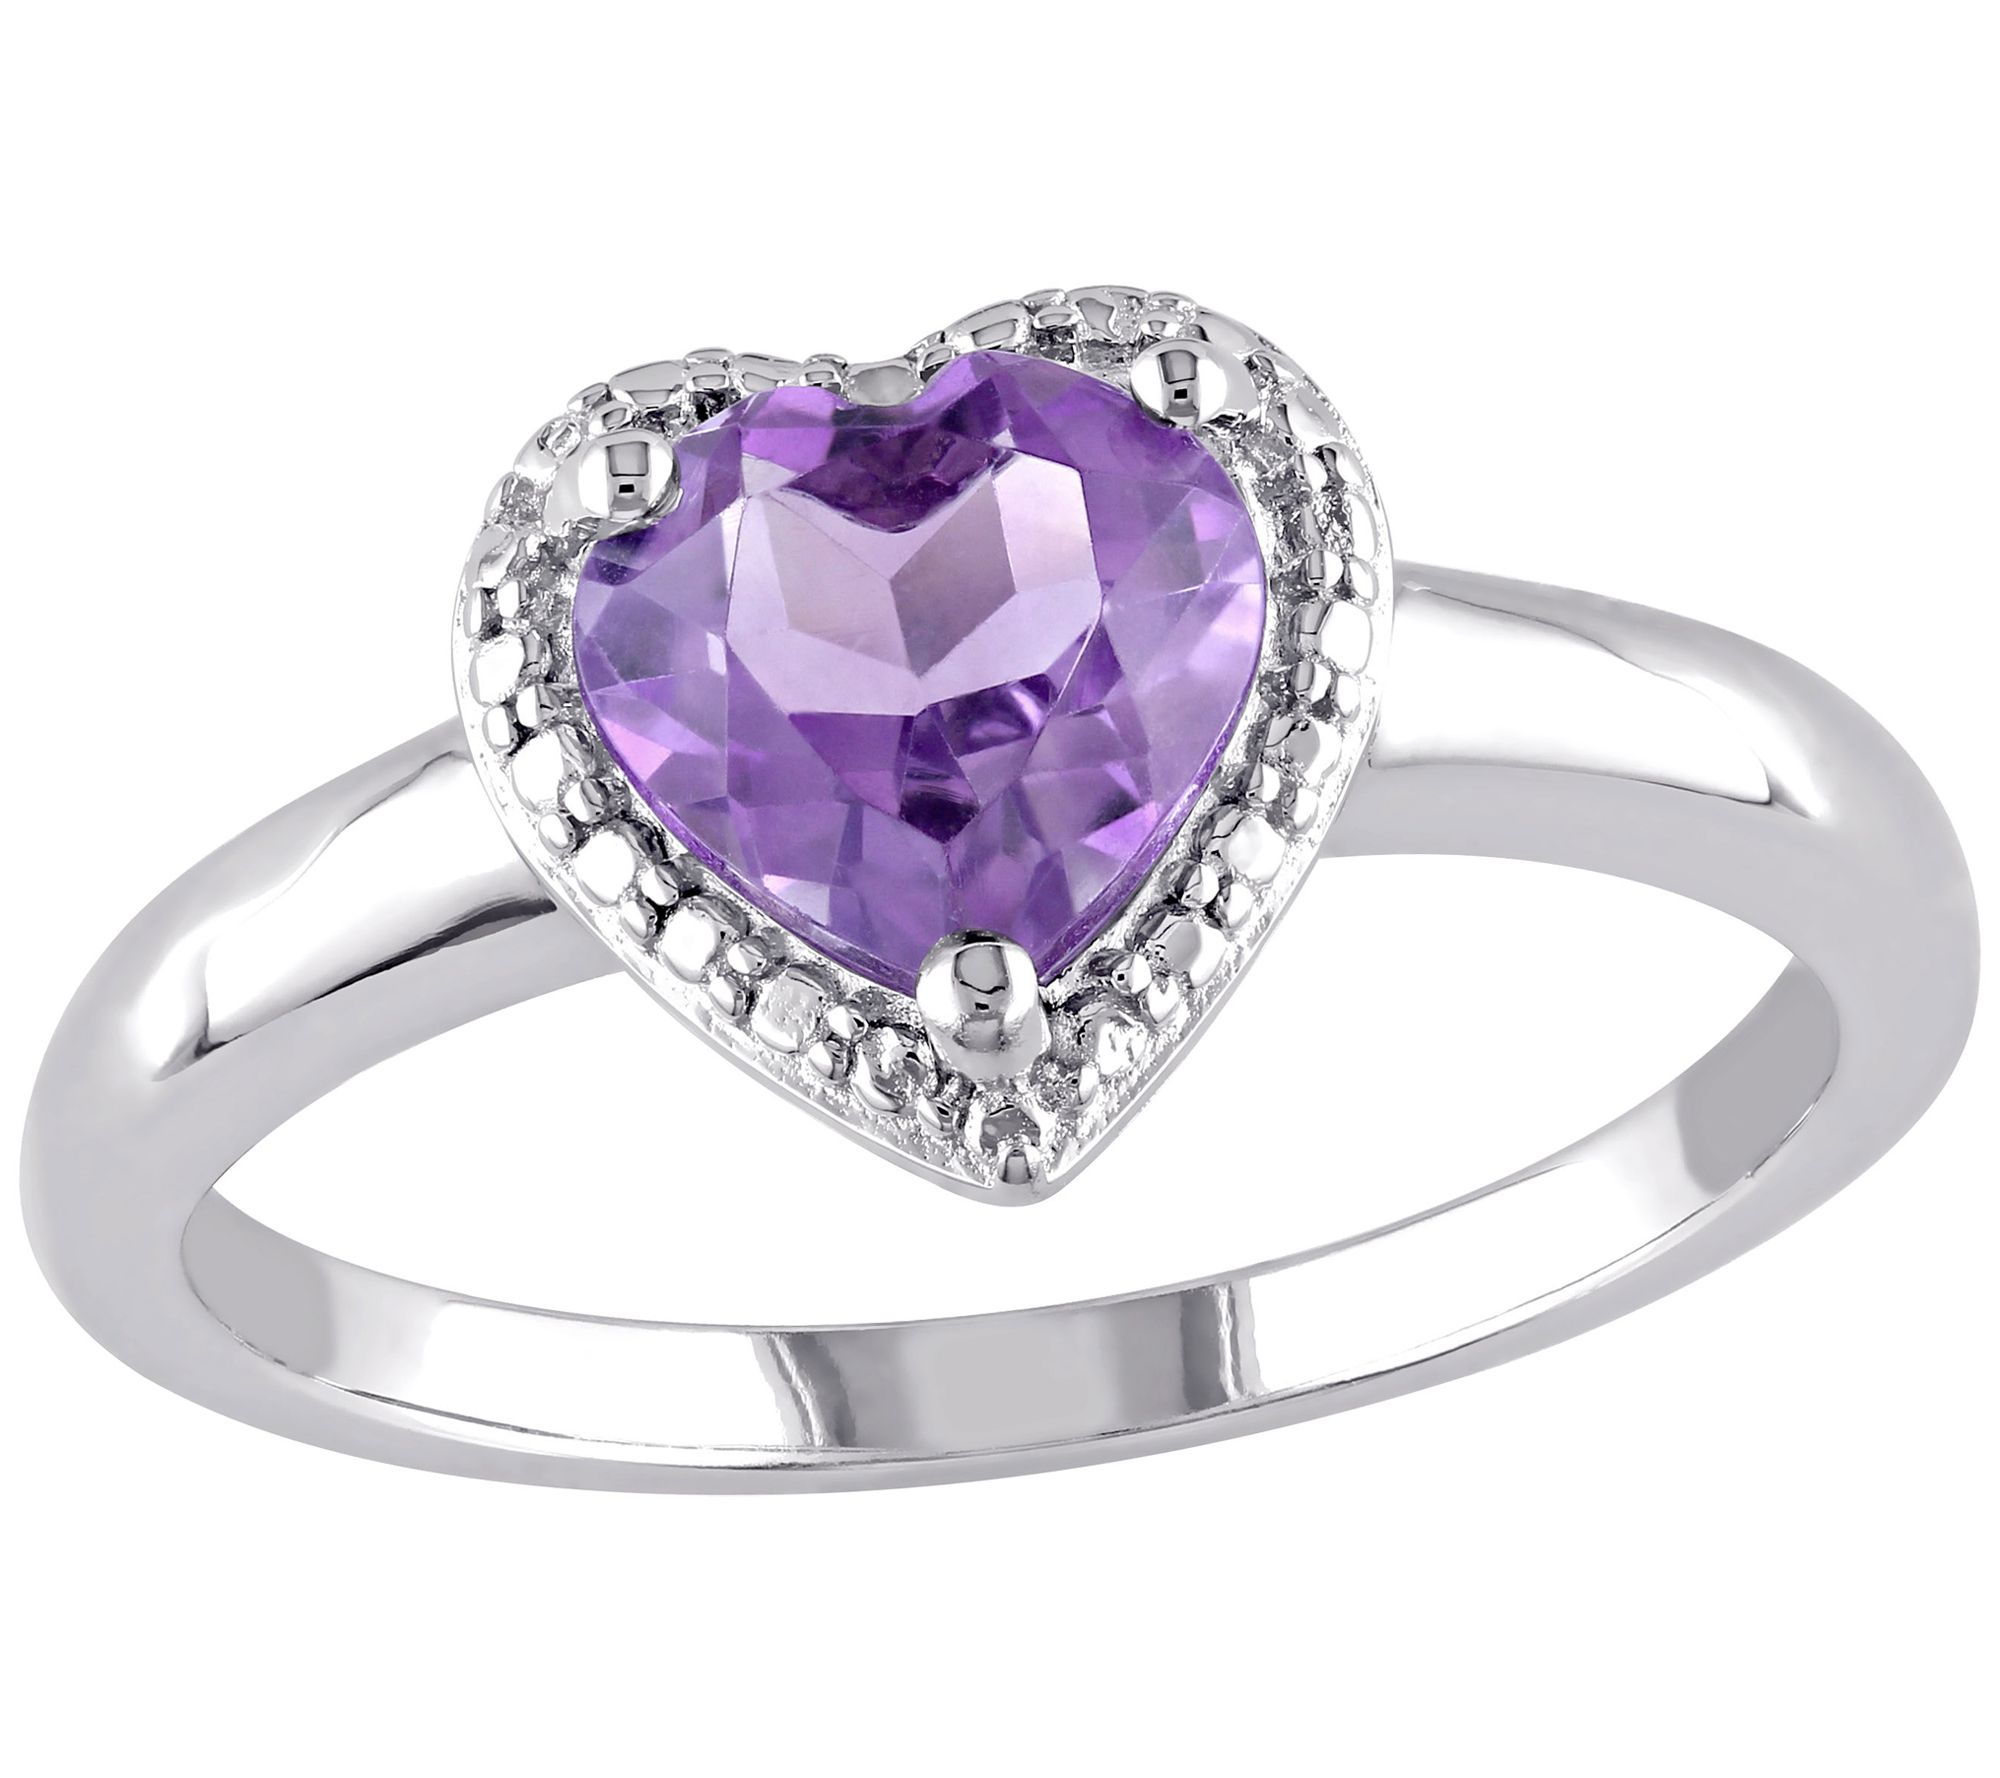 Sterling Silver 1.05 cttw Amethyst Heart Halo Ring - QVC.com